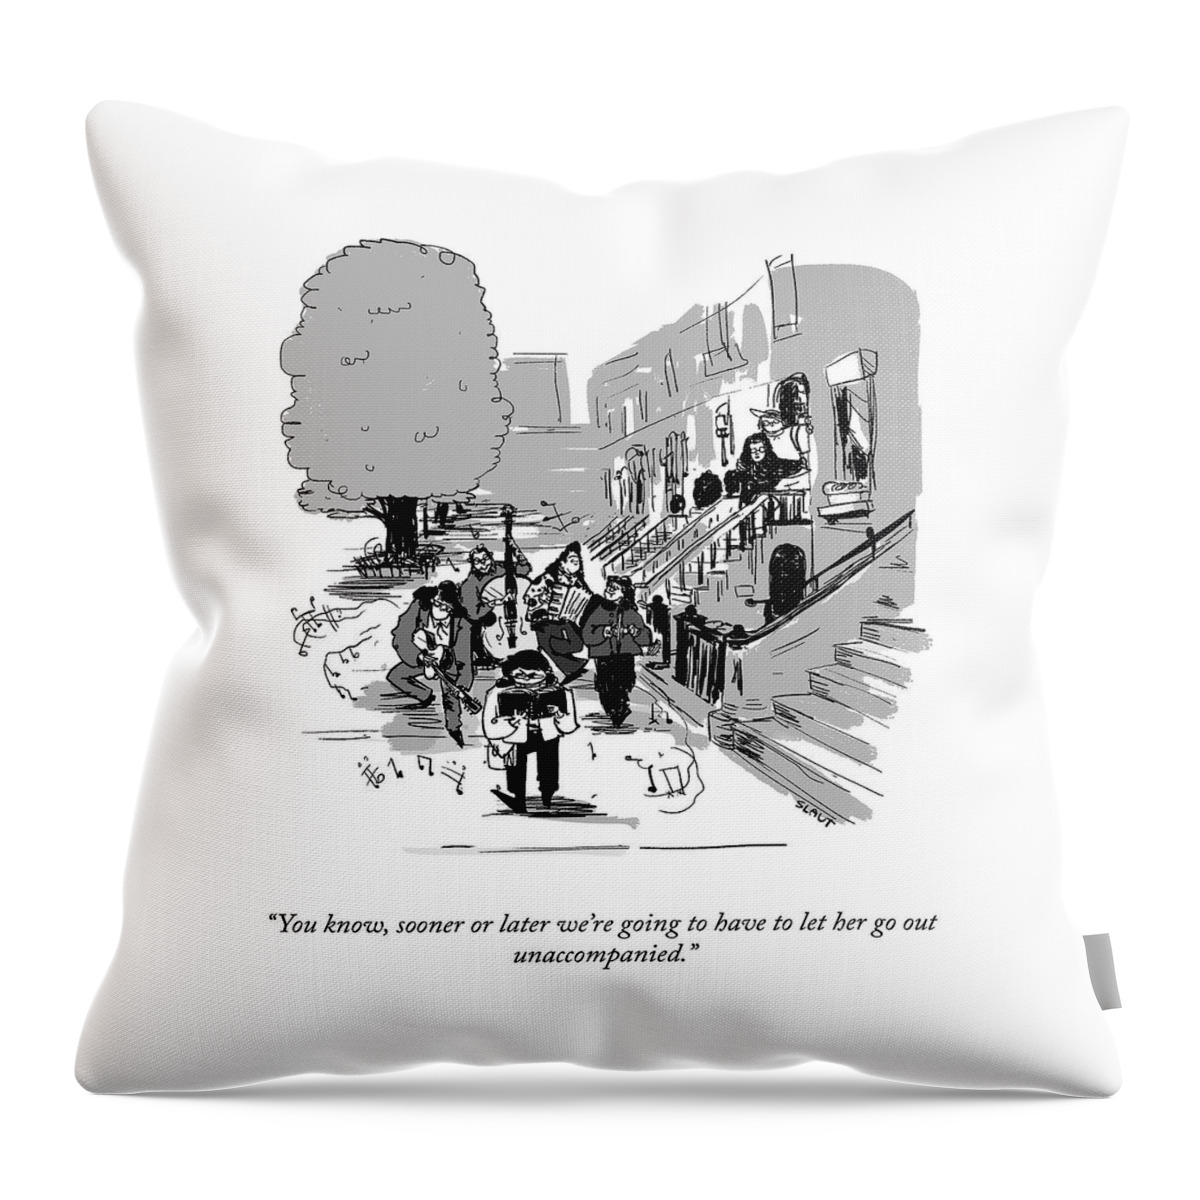 Let Her Go Out Unaccompanied Throw Pillow